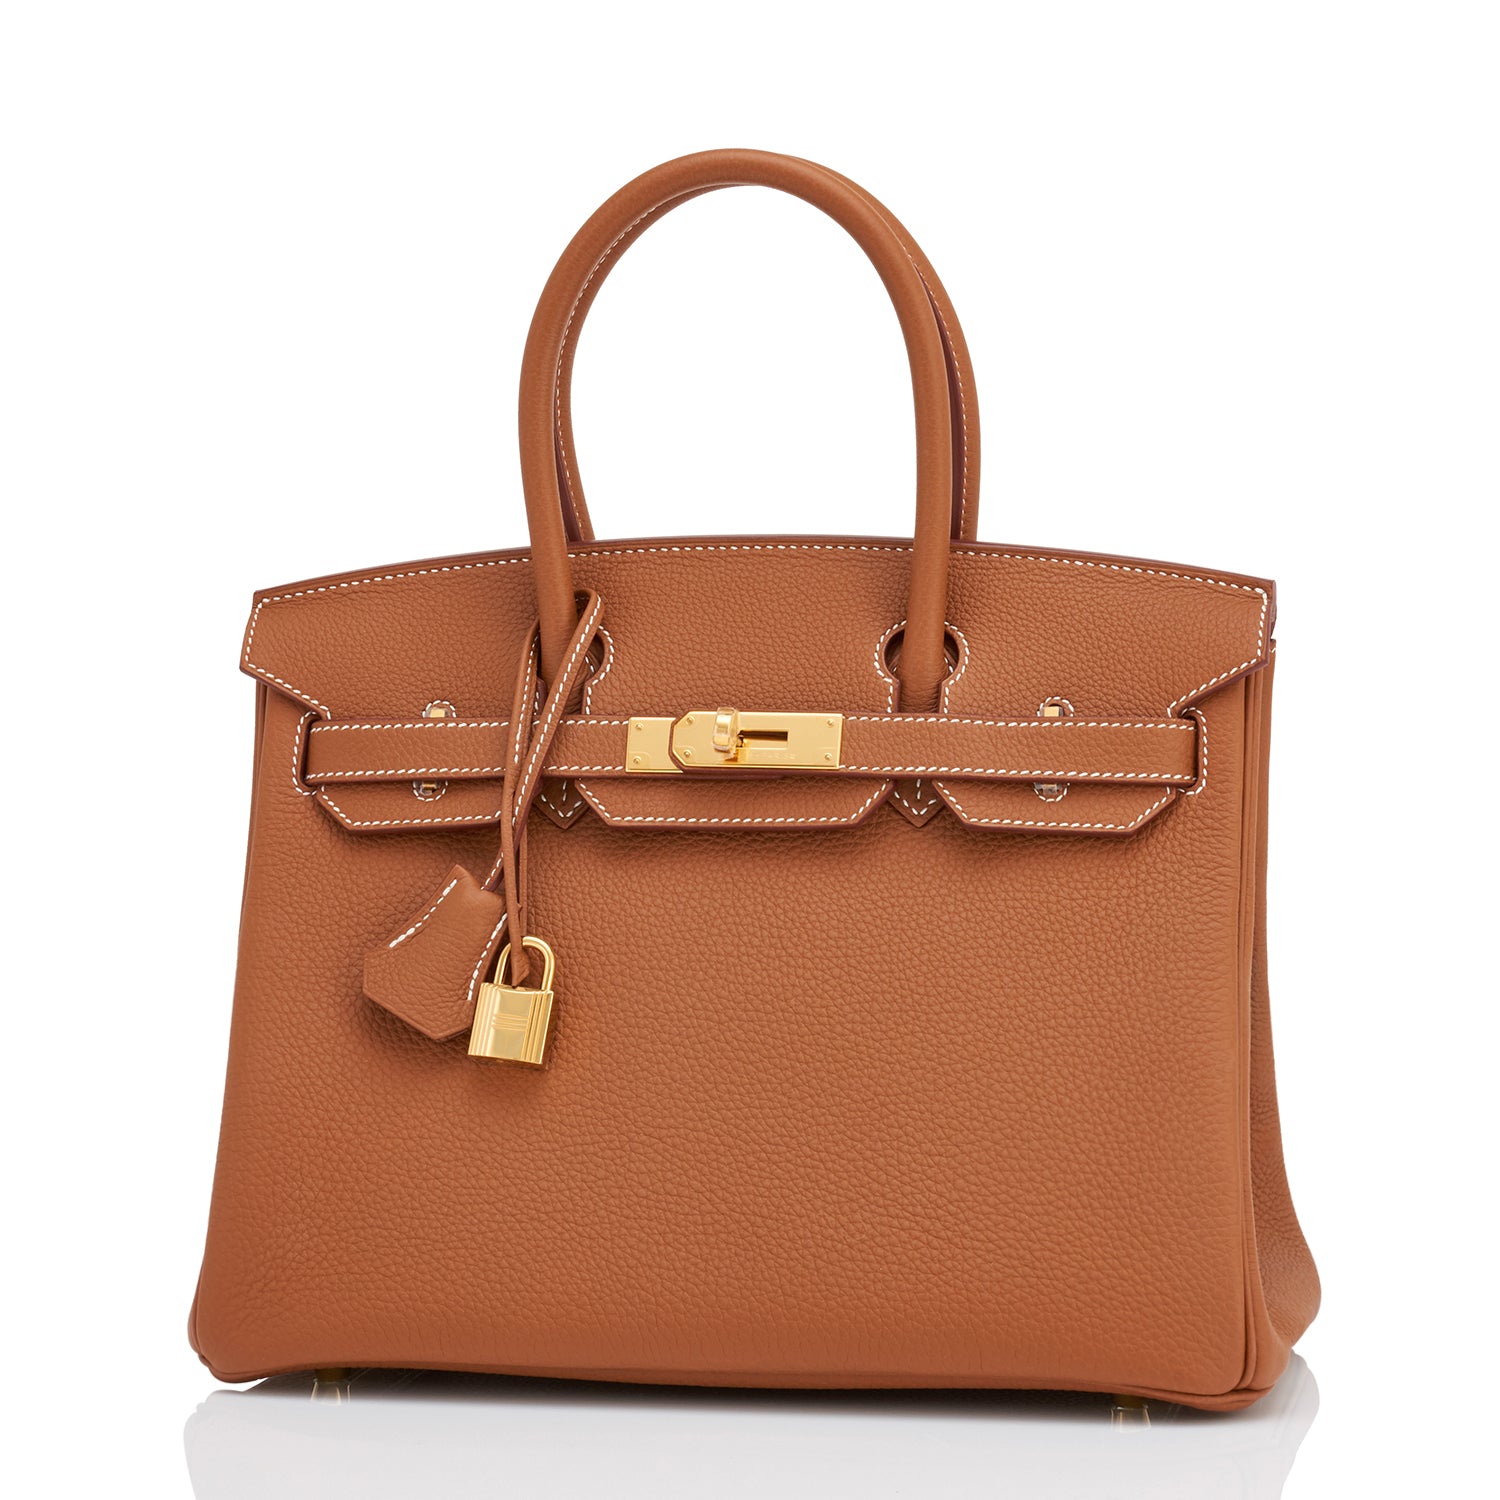 New HERMES BAGS and Accessories 2022